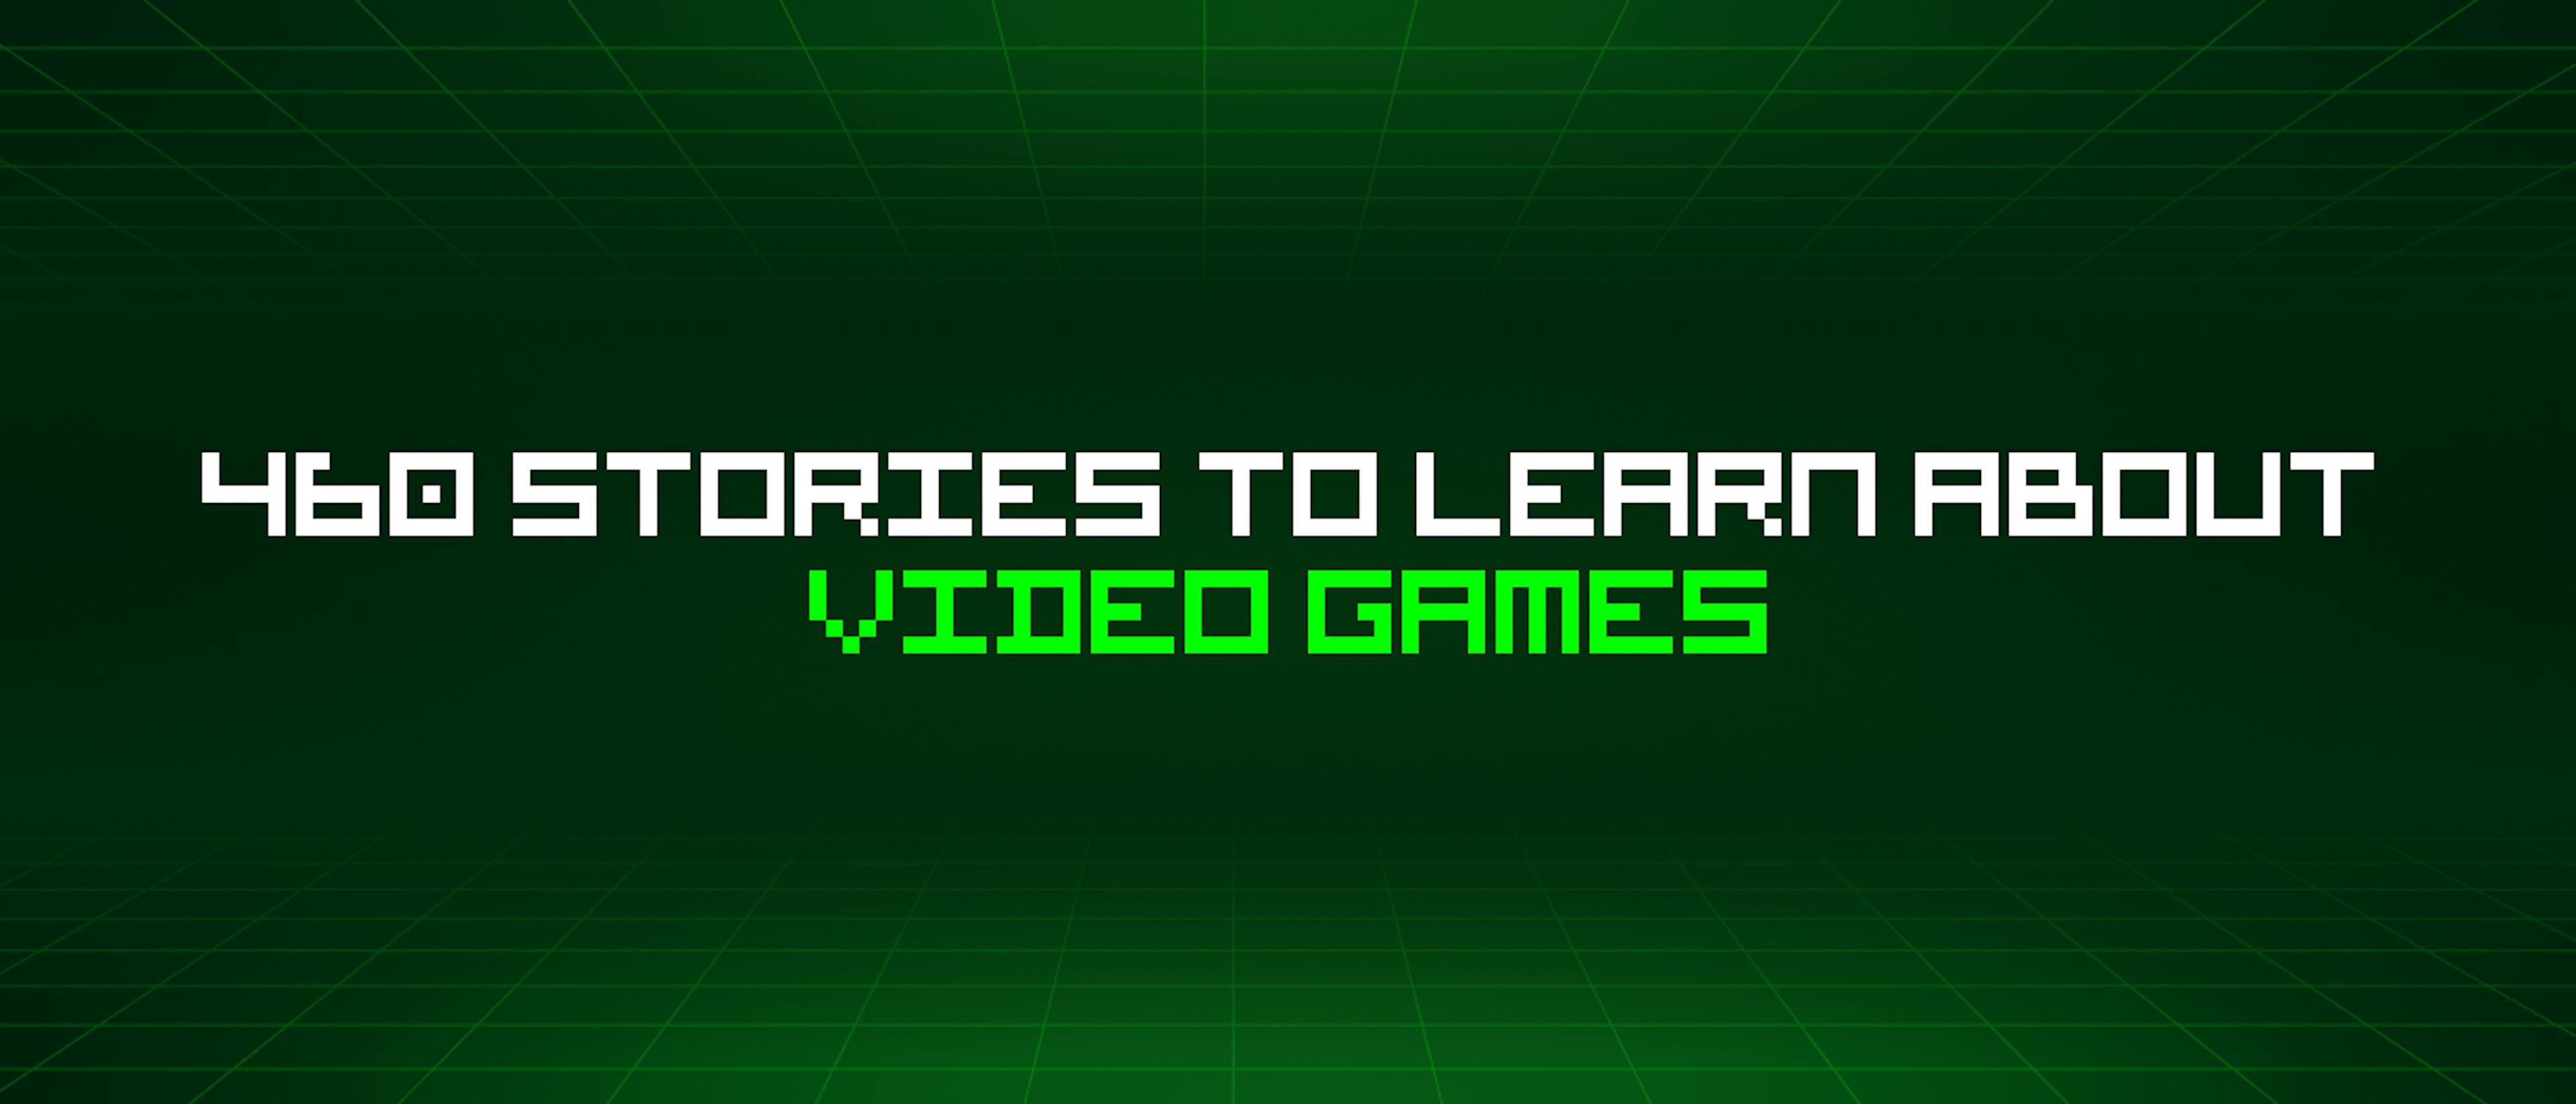 featured image - 460 Stories To Learn About Video Games